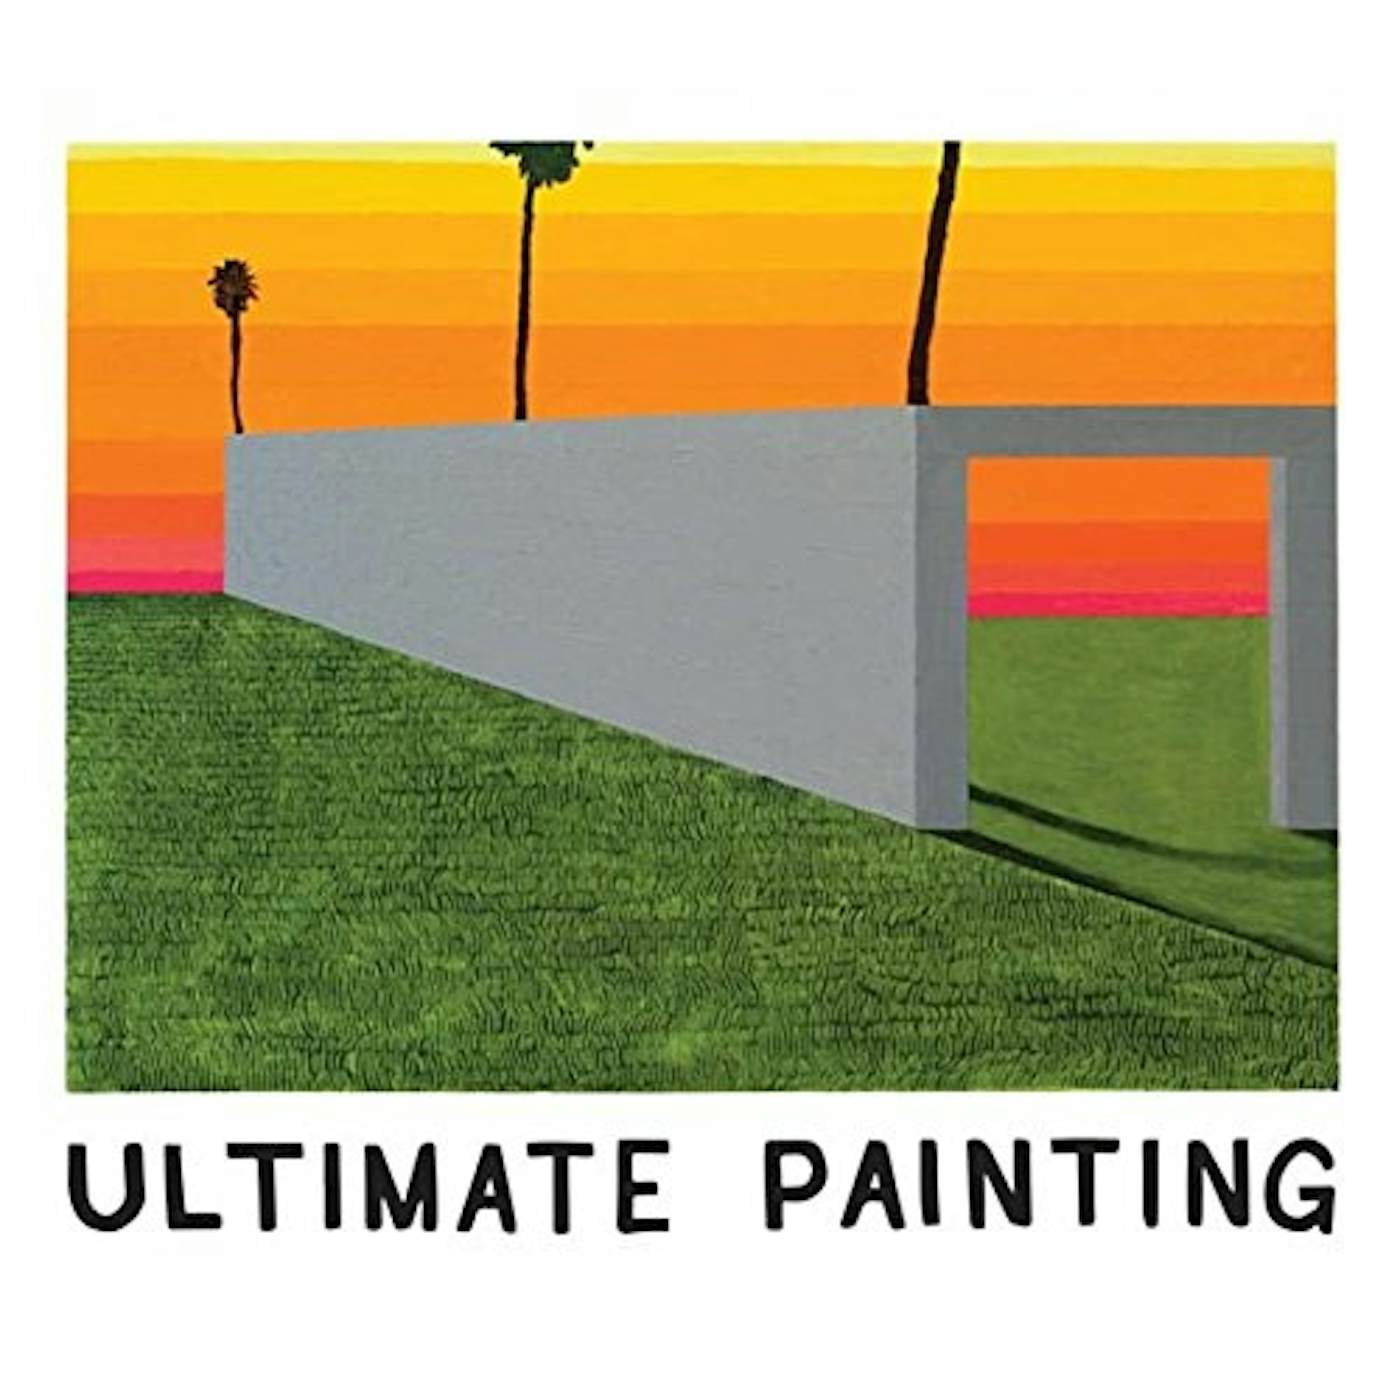 Ultimate Painting Vinyl Record